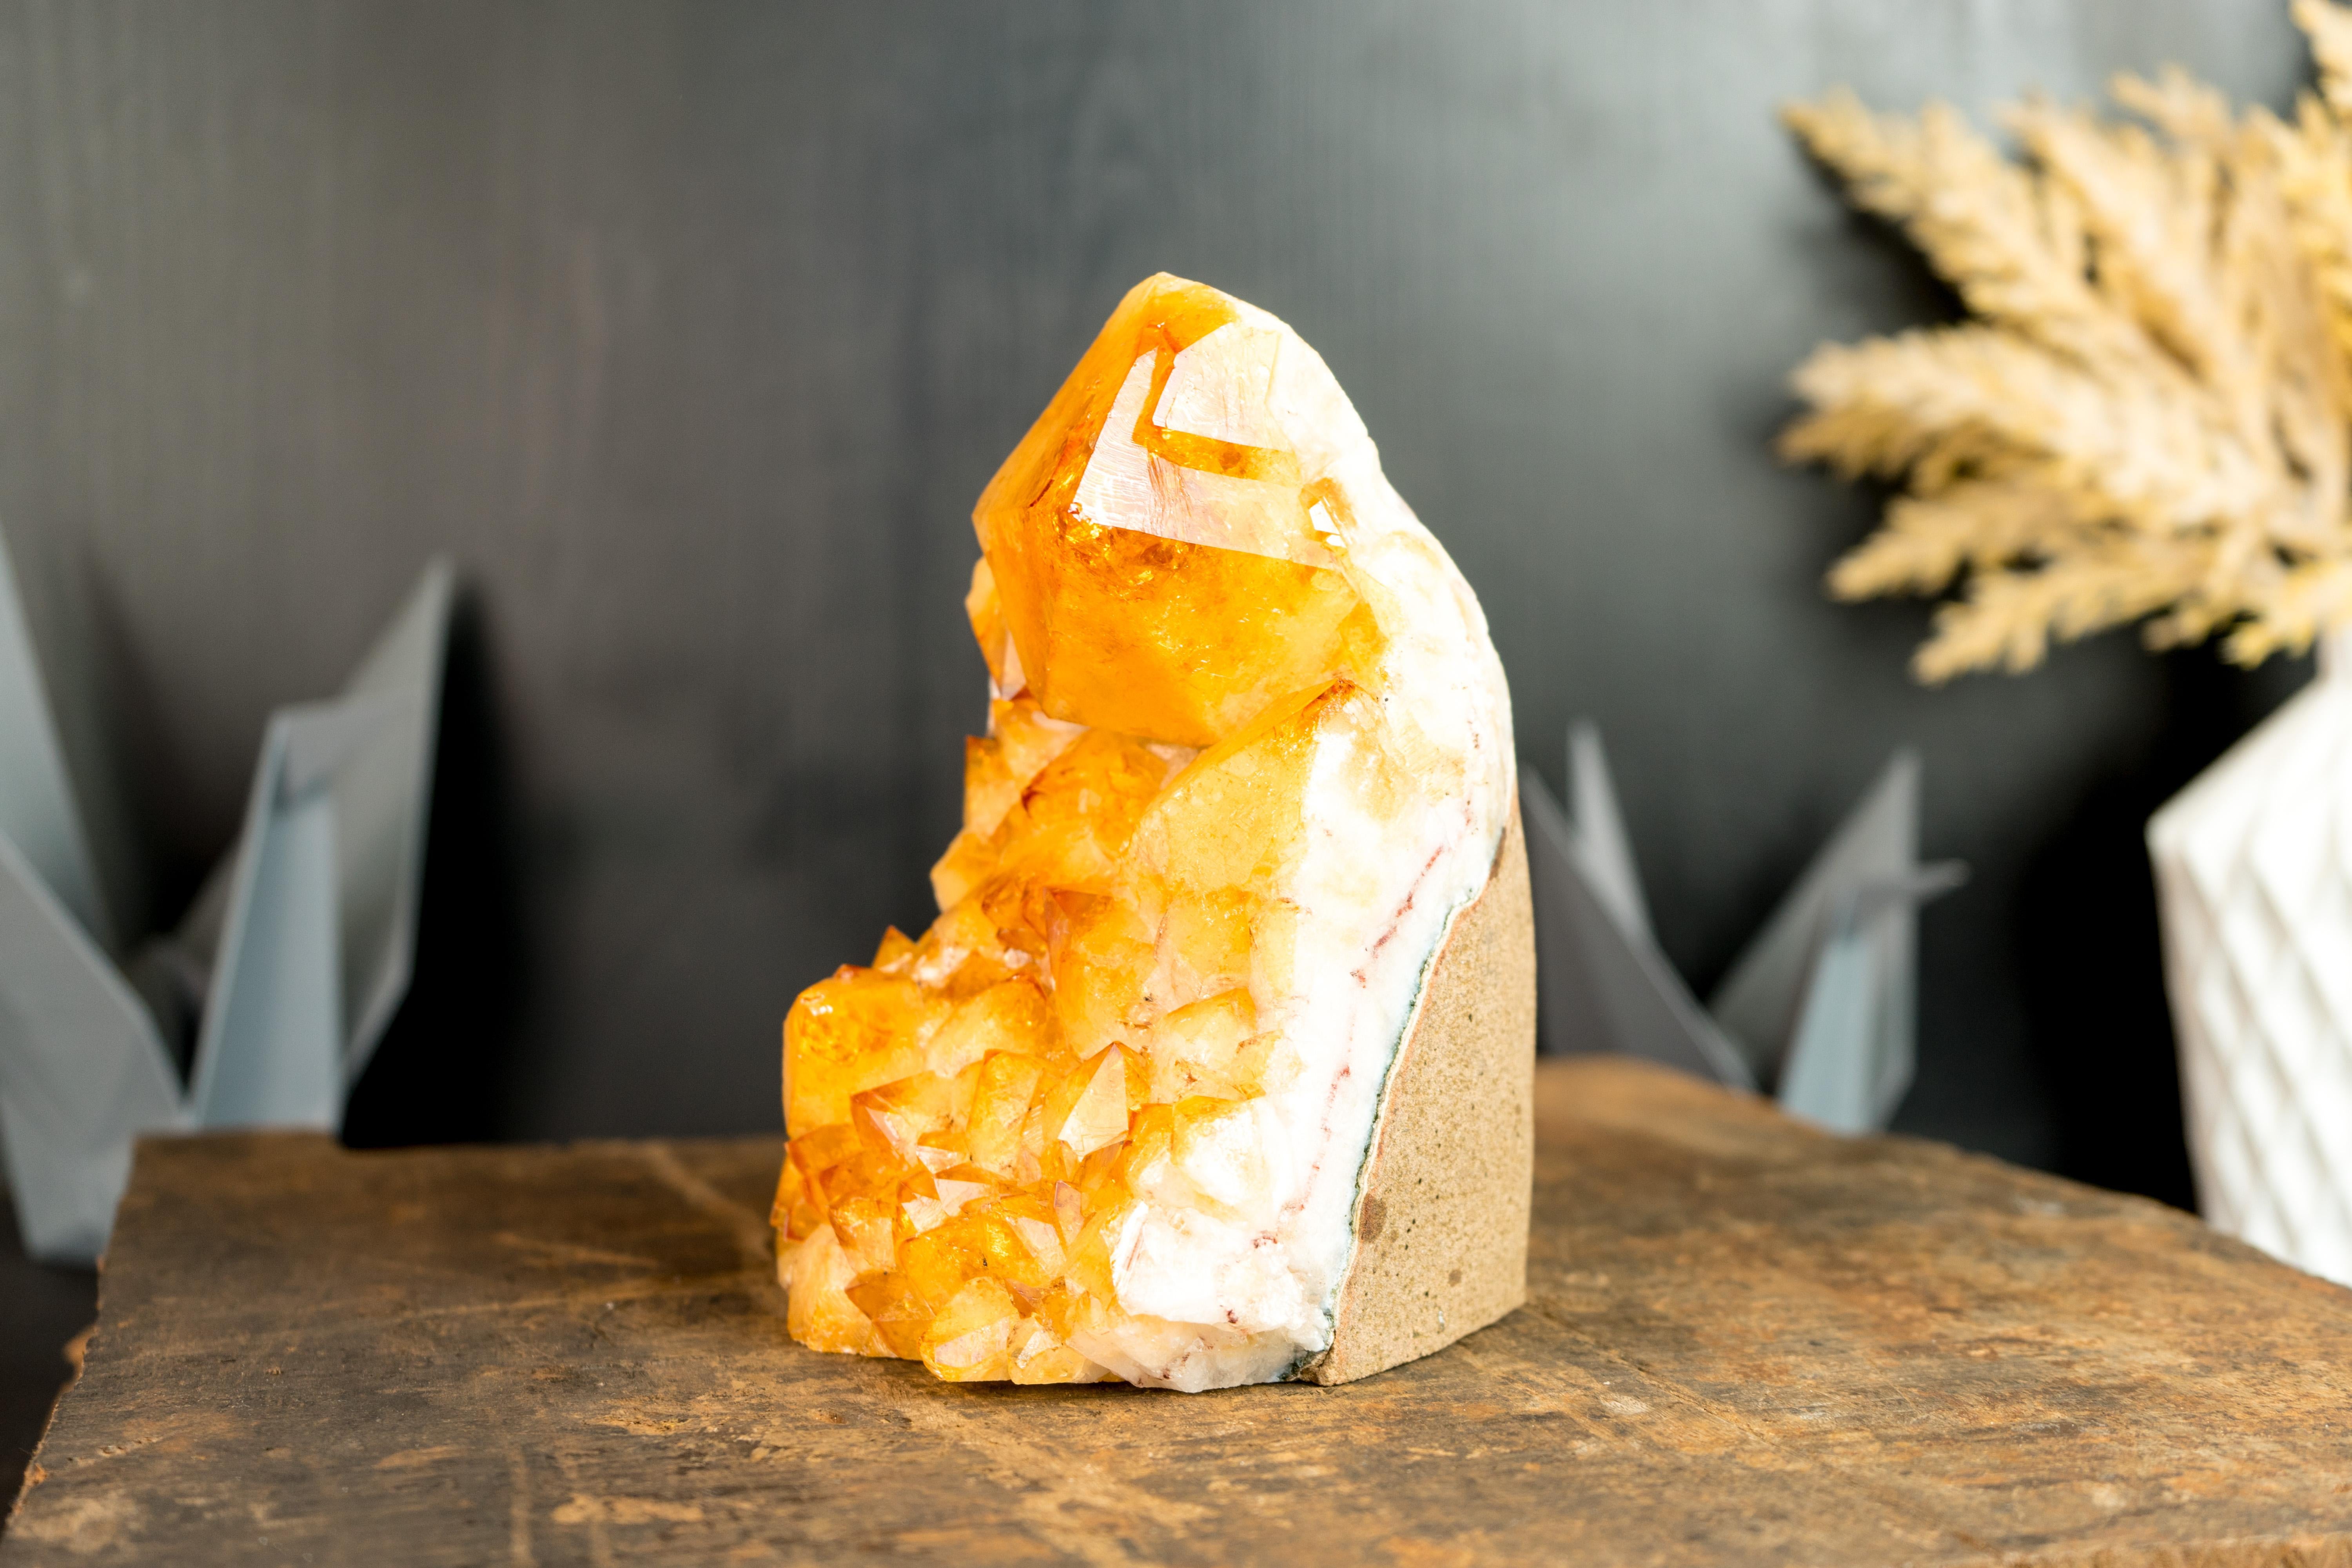 Brazilian Citrine Cluster with Rare Large Citrine Point, Orange Citrine Color, Intact For Sale